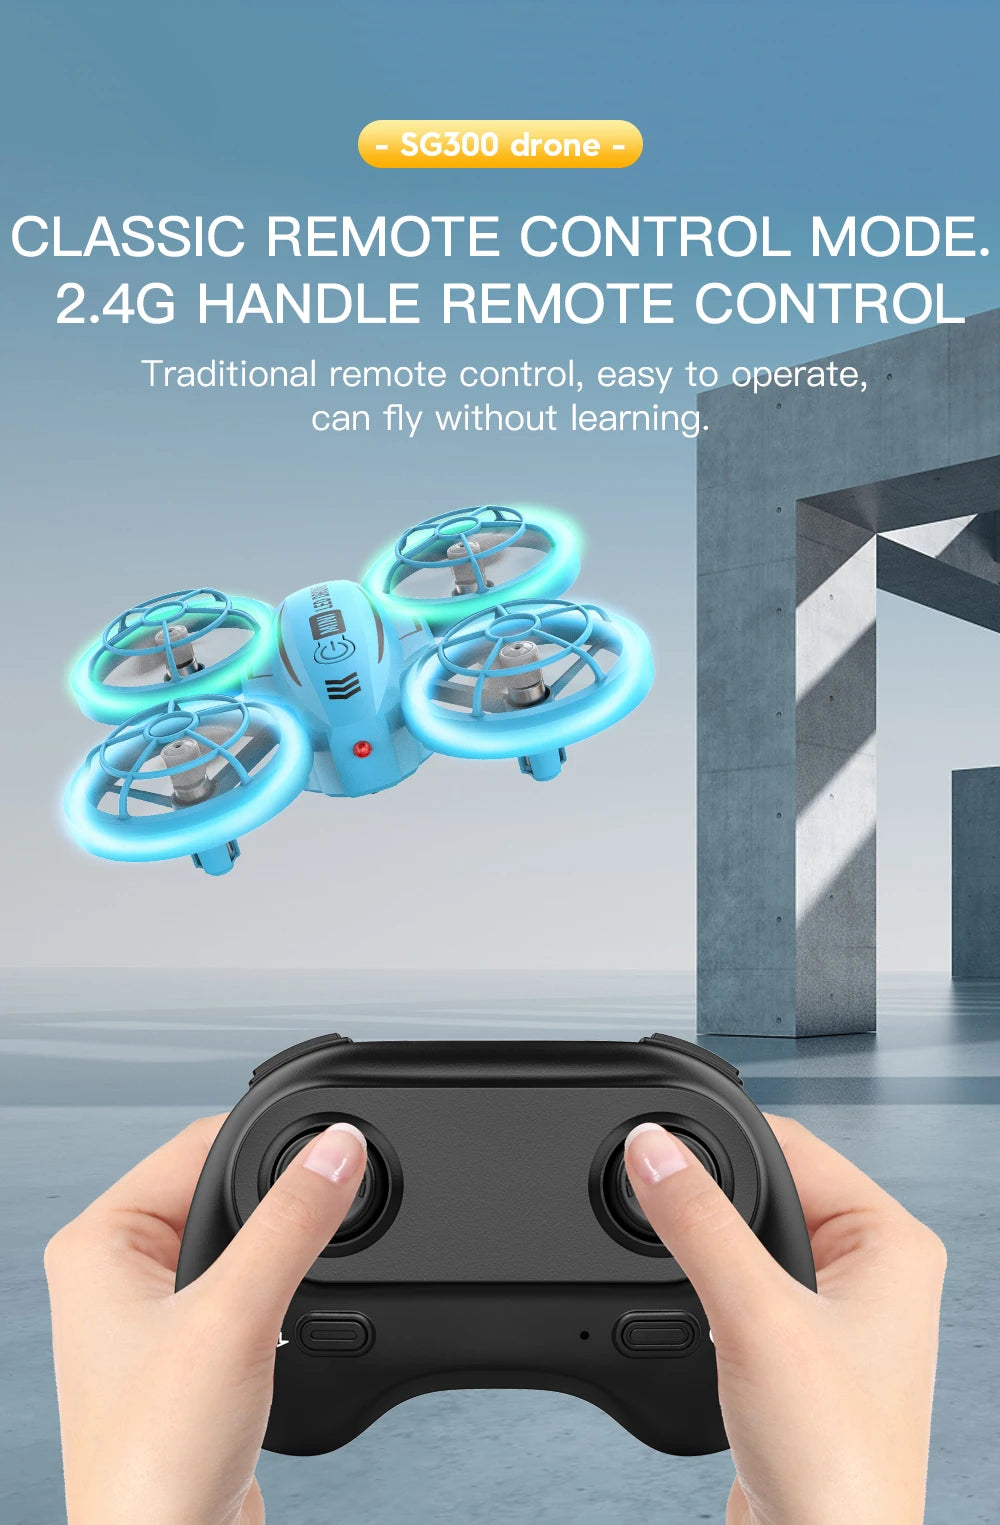 SG300/SG300S Mini Drone, drone classic remote control, easy to operate, can fly without learning: